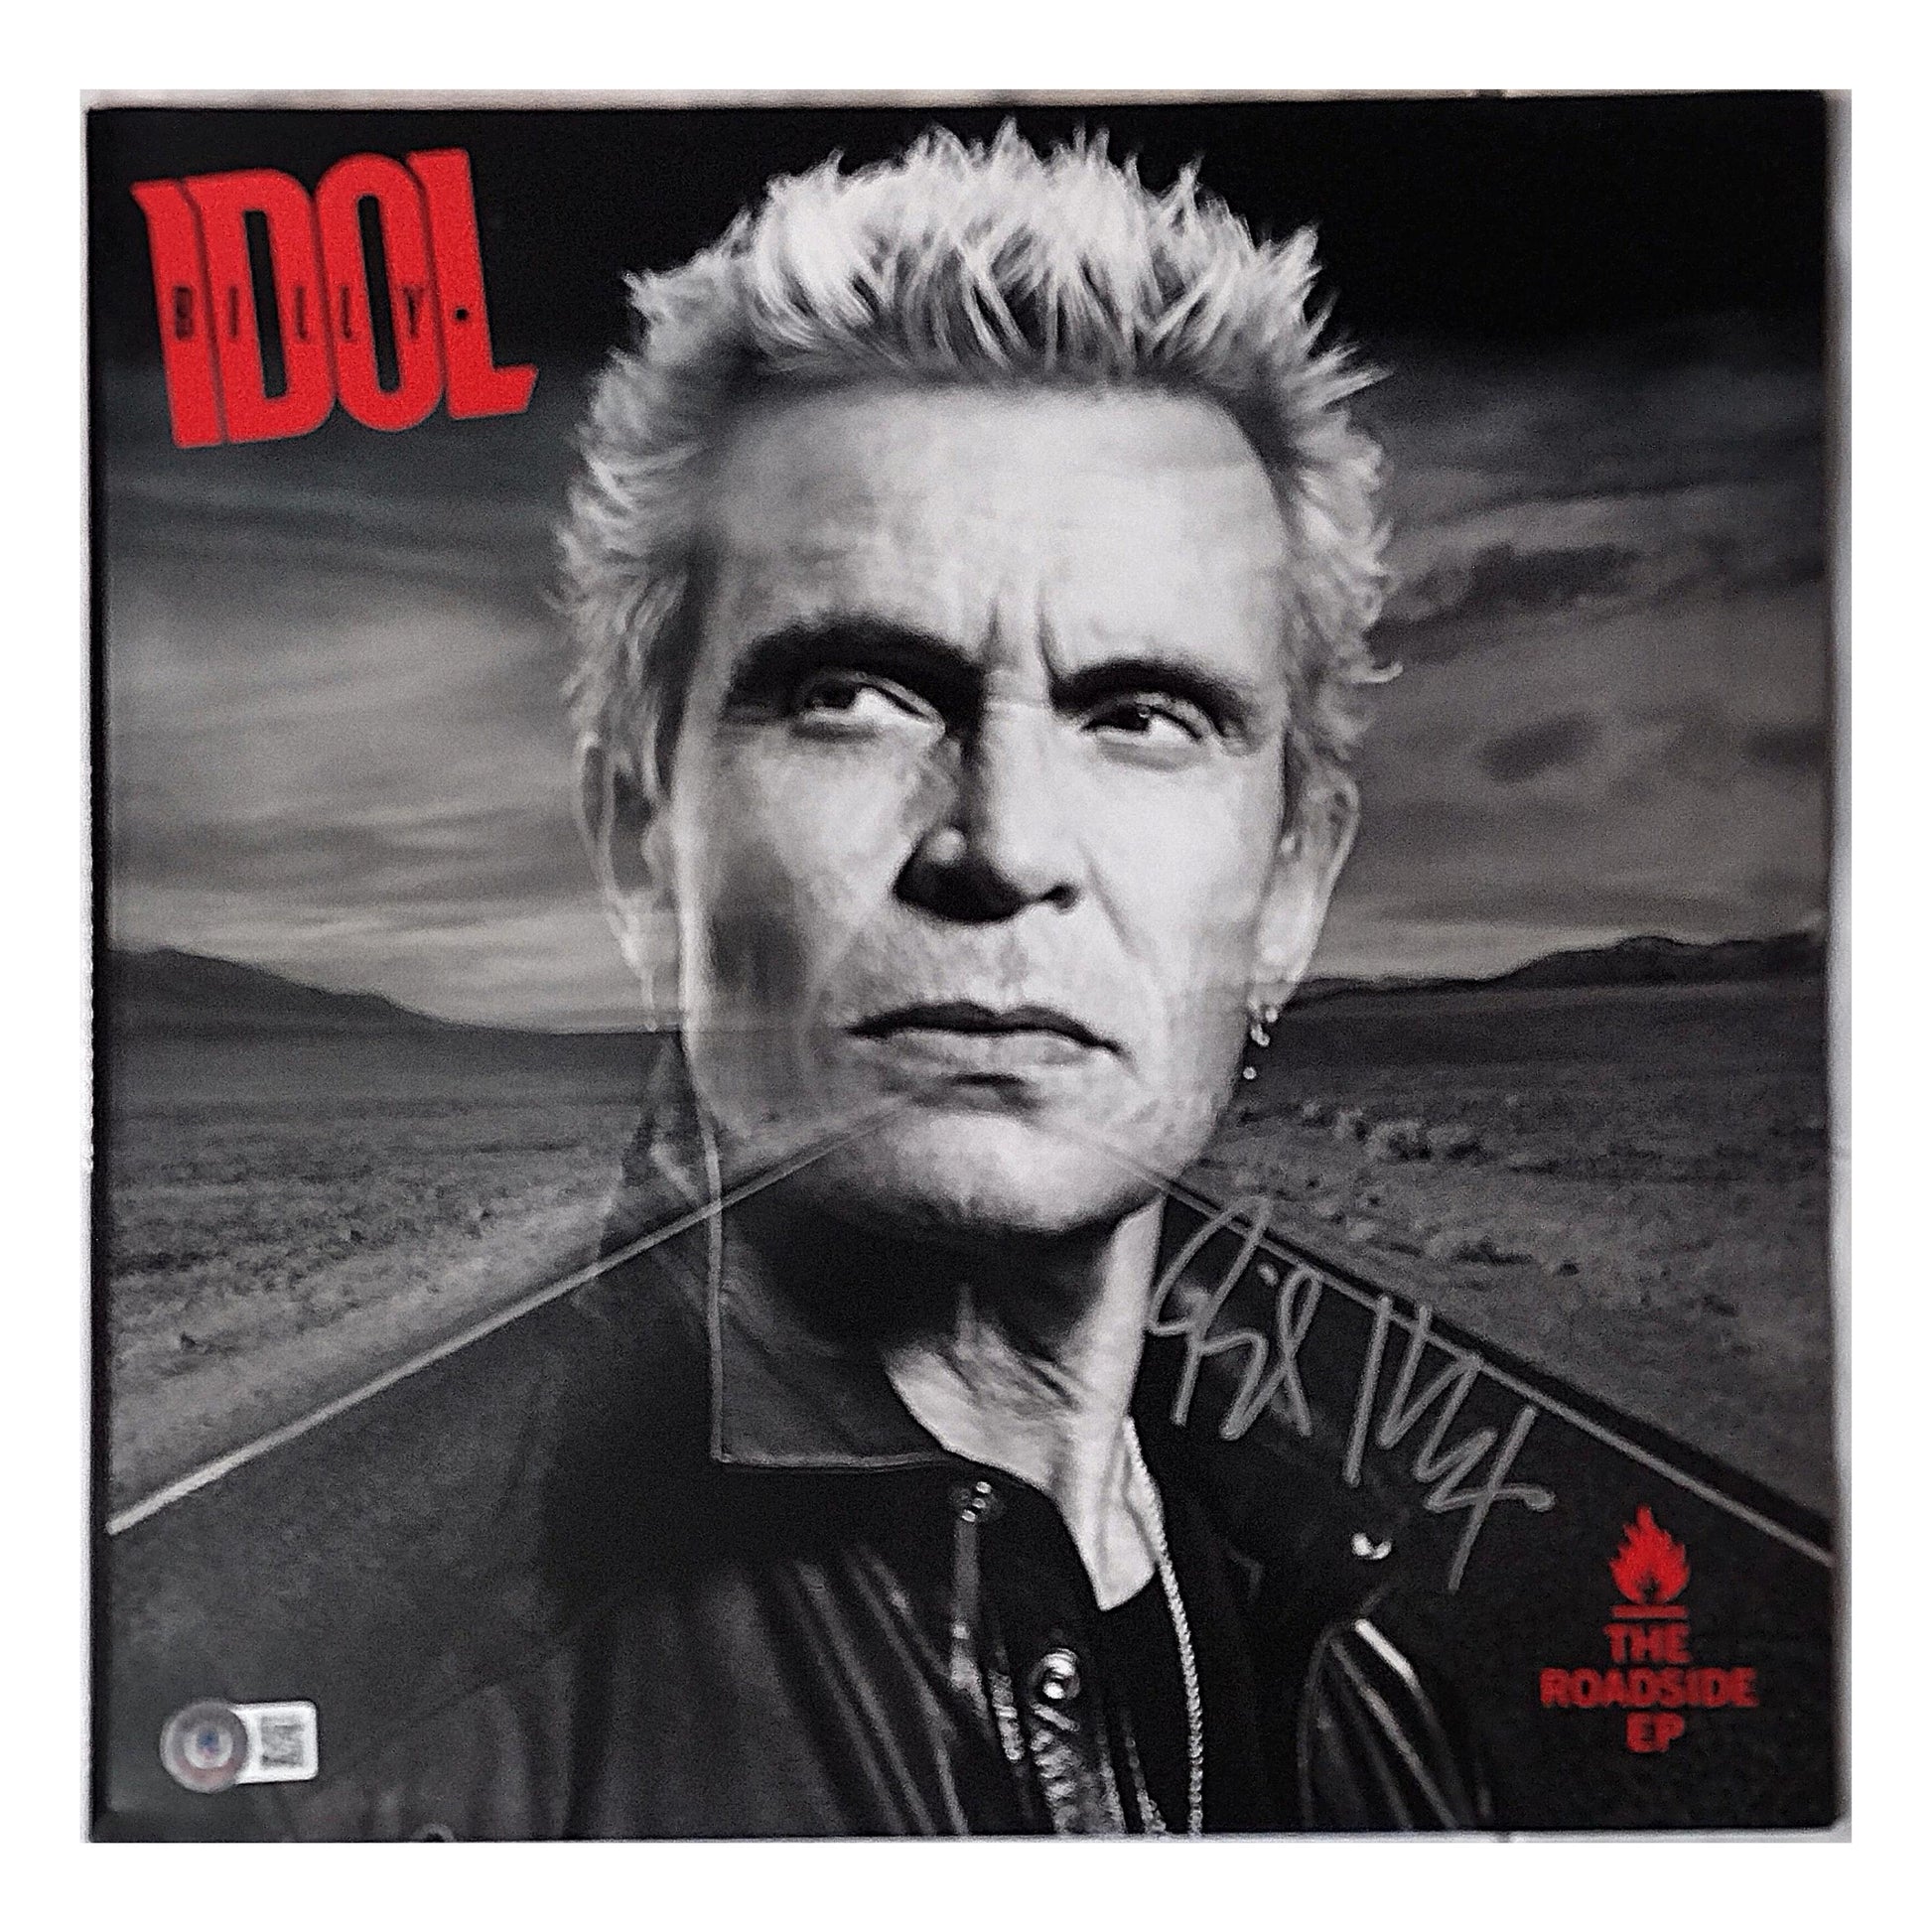 Music- Autographed- Billy Idol Signed Roadside EP Vinyl Record Album Cover Beckett BAS Authentication 202